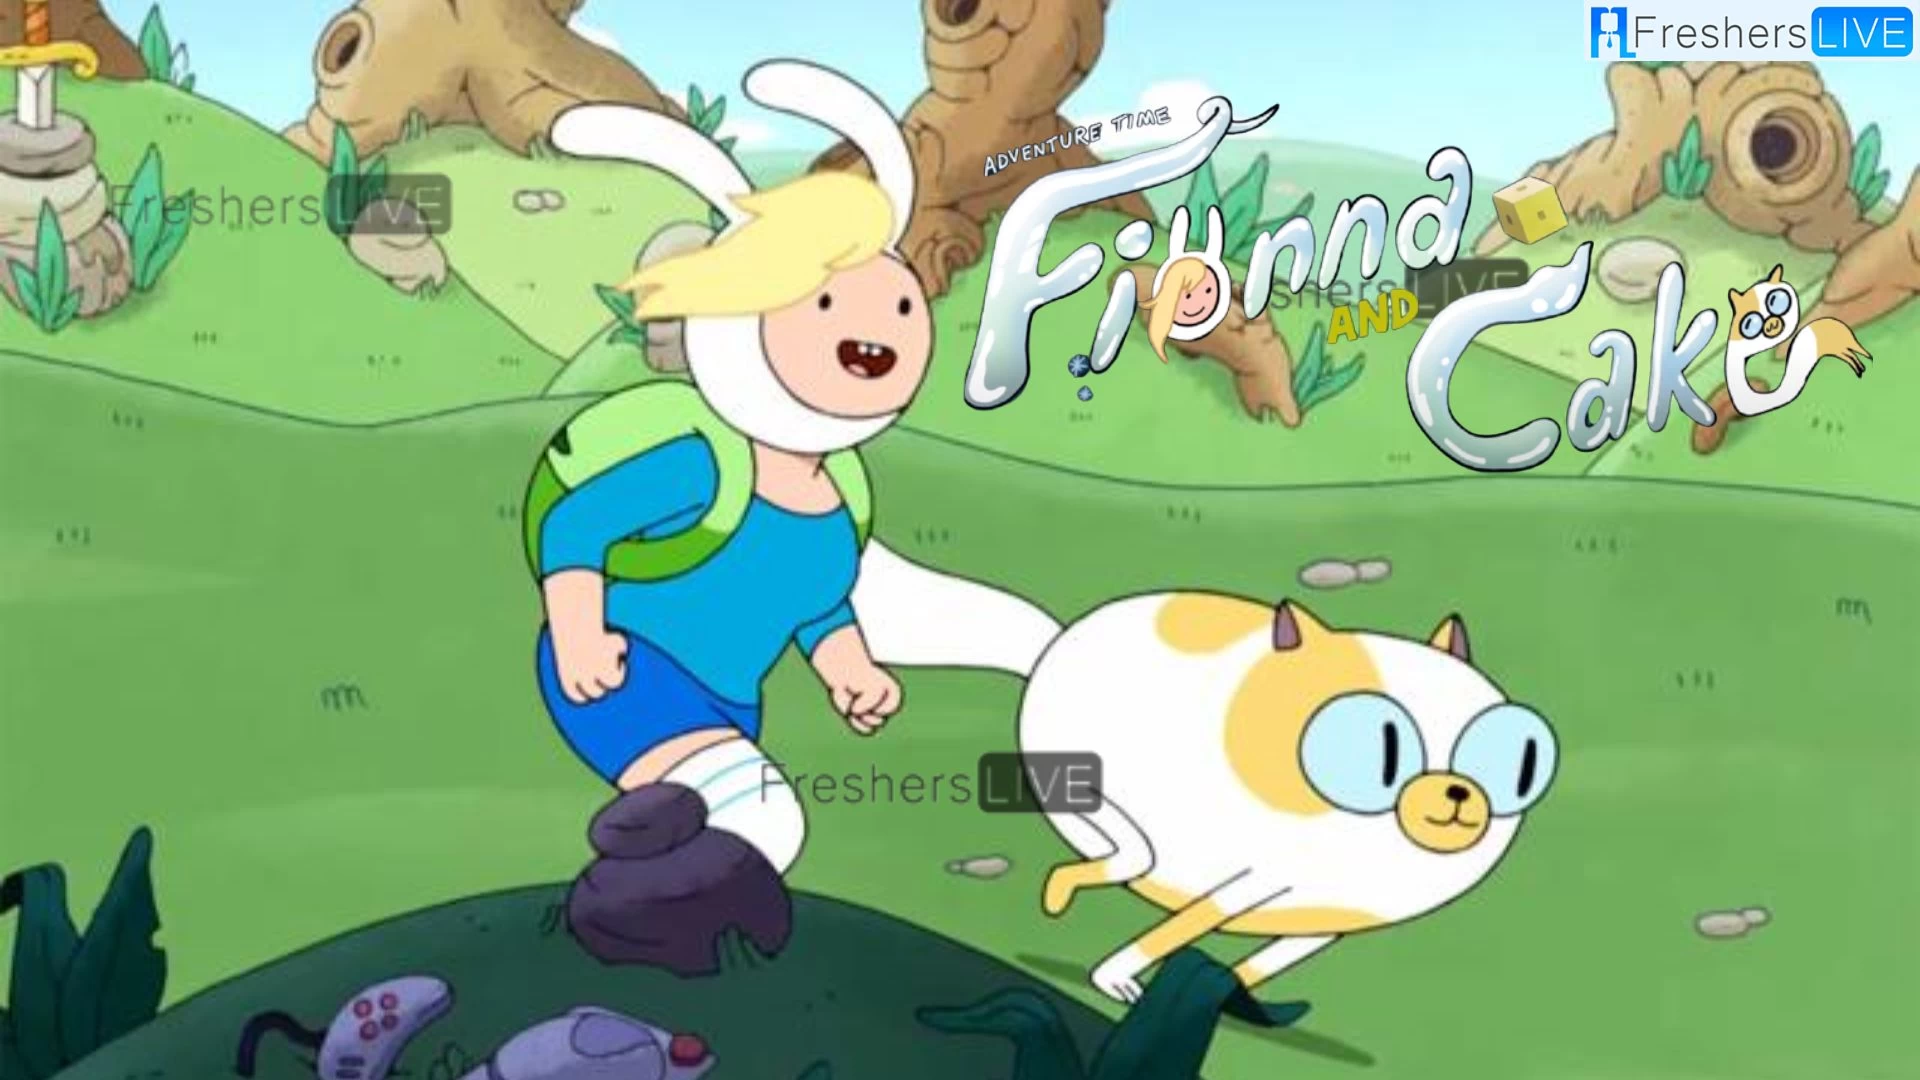 Adventure Time Fionna and Cake Season 1 Ending Explained, Release Date, Cast, Plot, Where to Watch and More